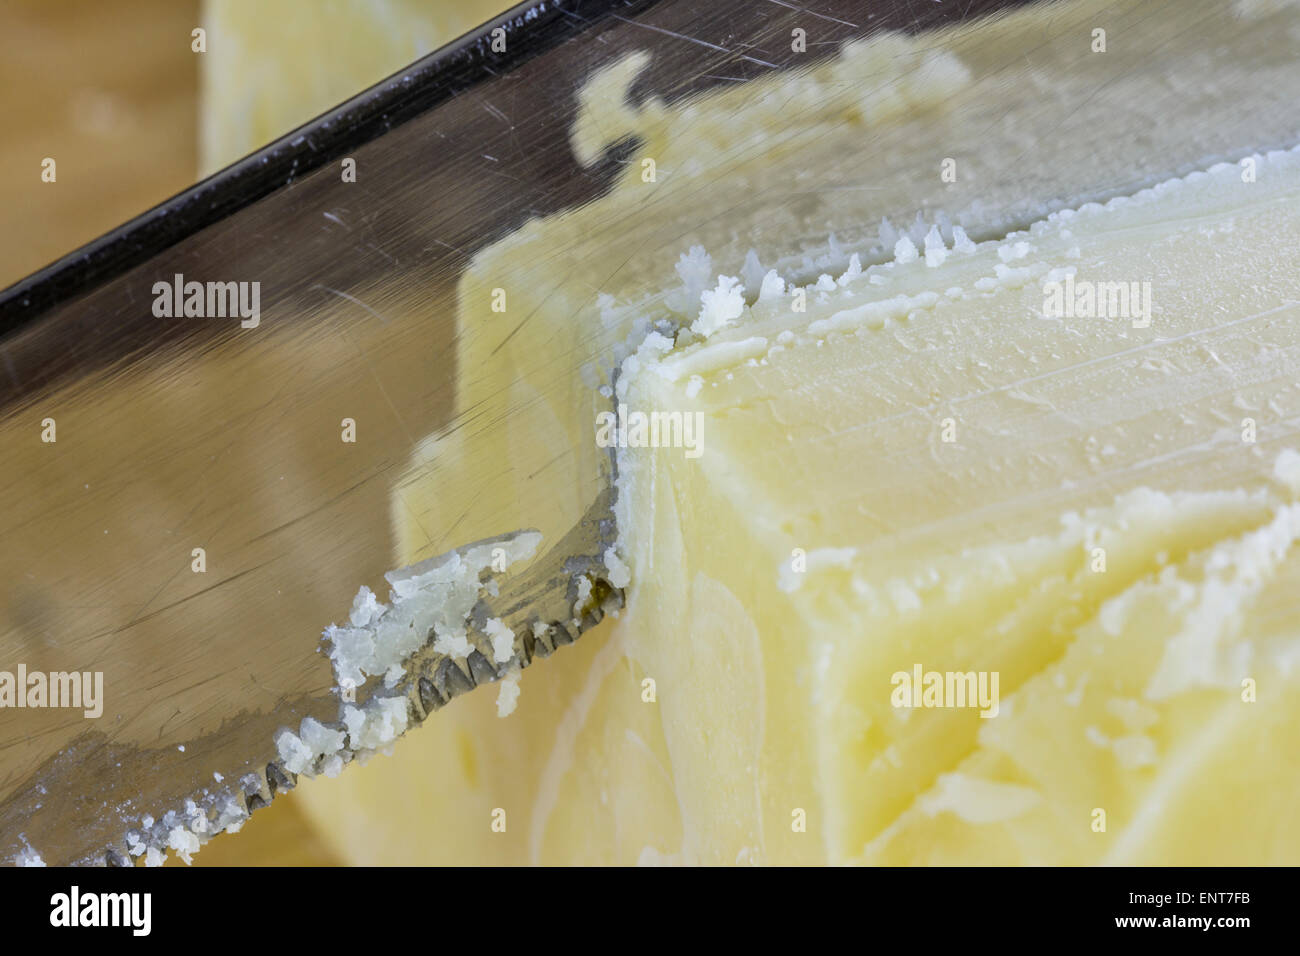 Knife cutting through yellow cheddar cheese with a reflection in the knife. Stock Photo